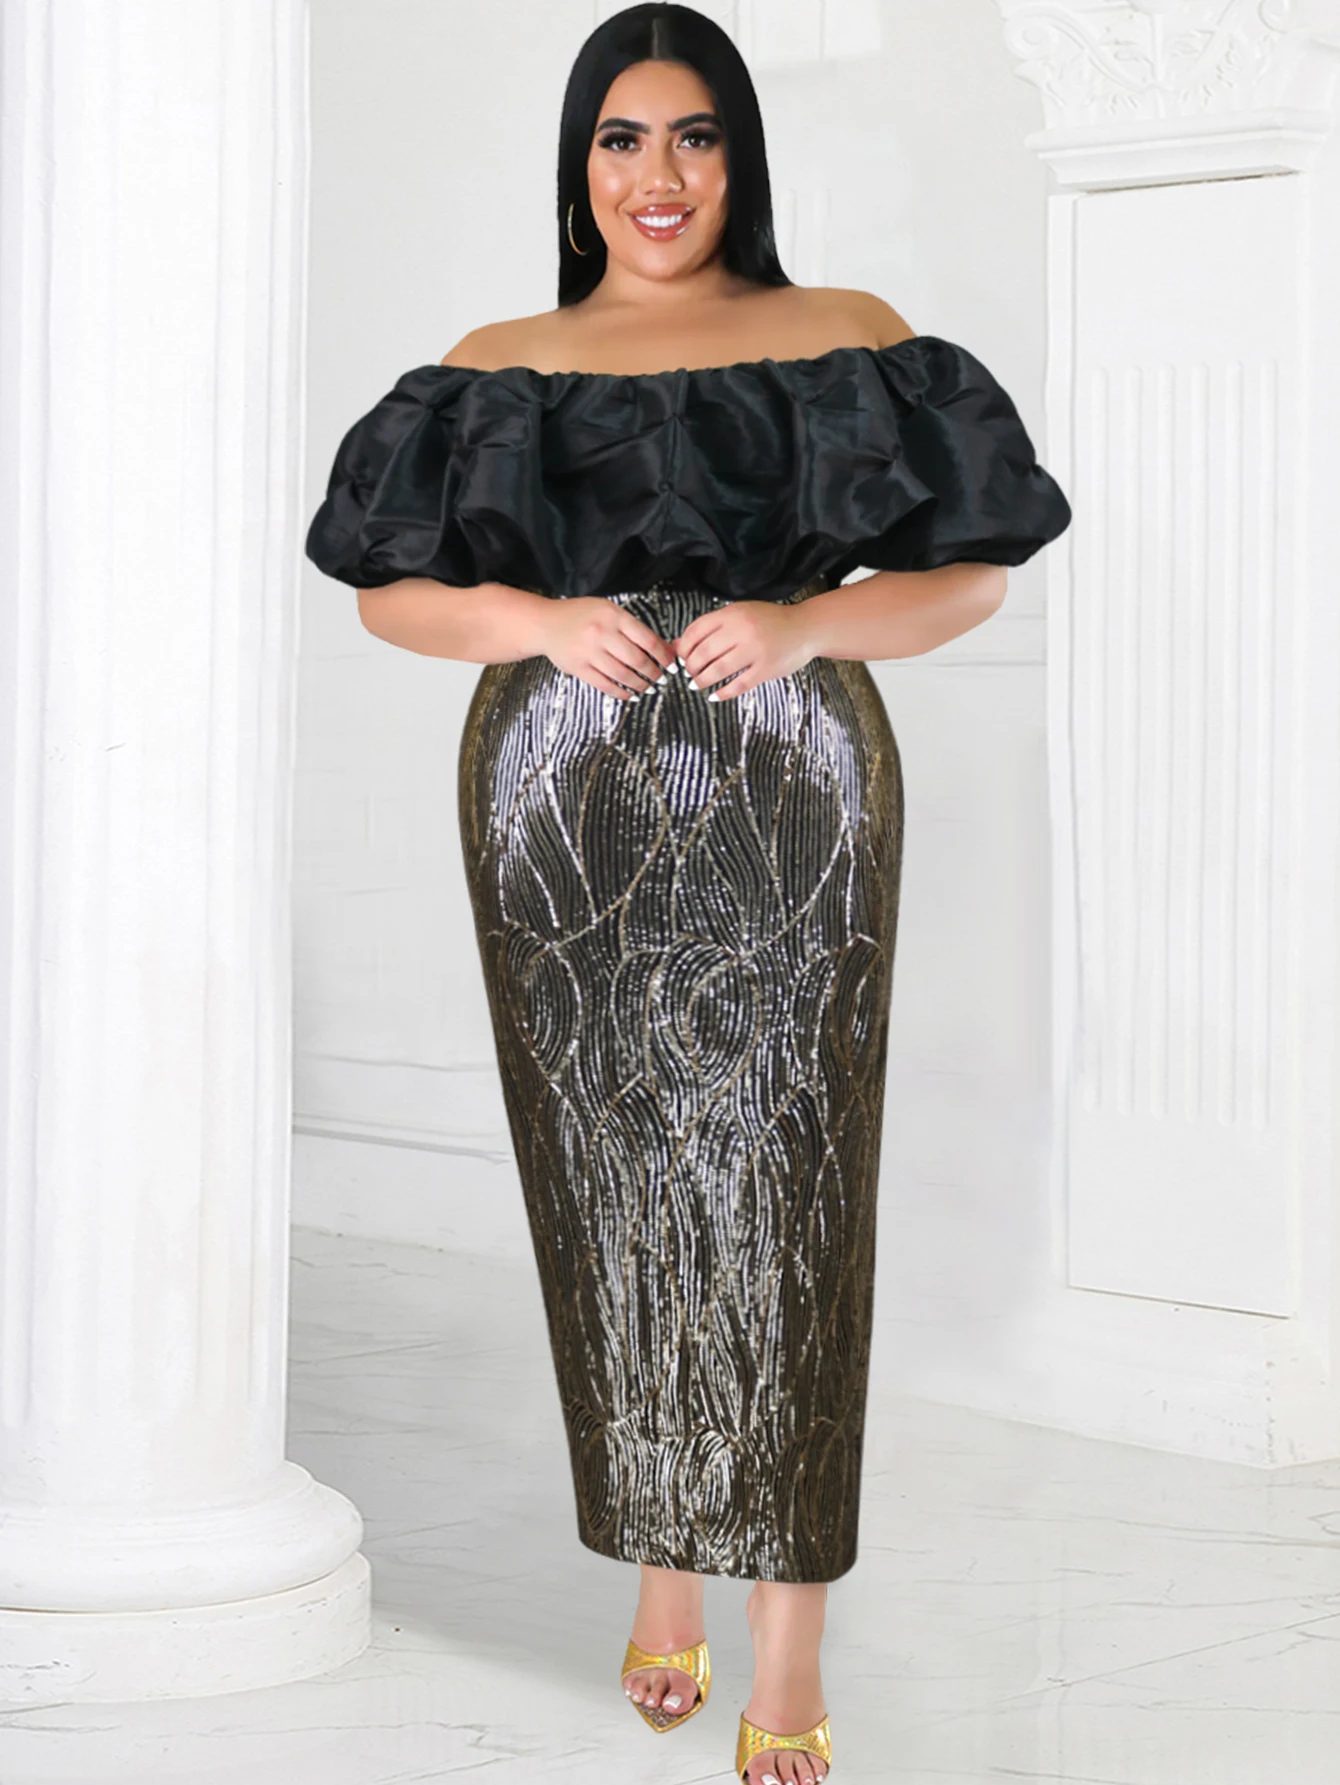 women-luxury-evening-party-dress-bare-shoulder-ruffle-patchwork-strapless-maxi-robe-cocktail-prom-birthday-event-plus-size-gowns